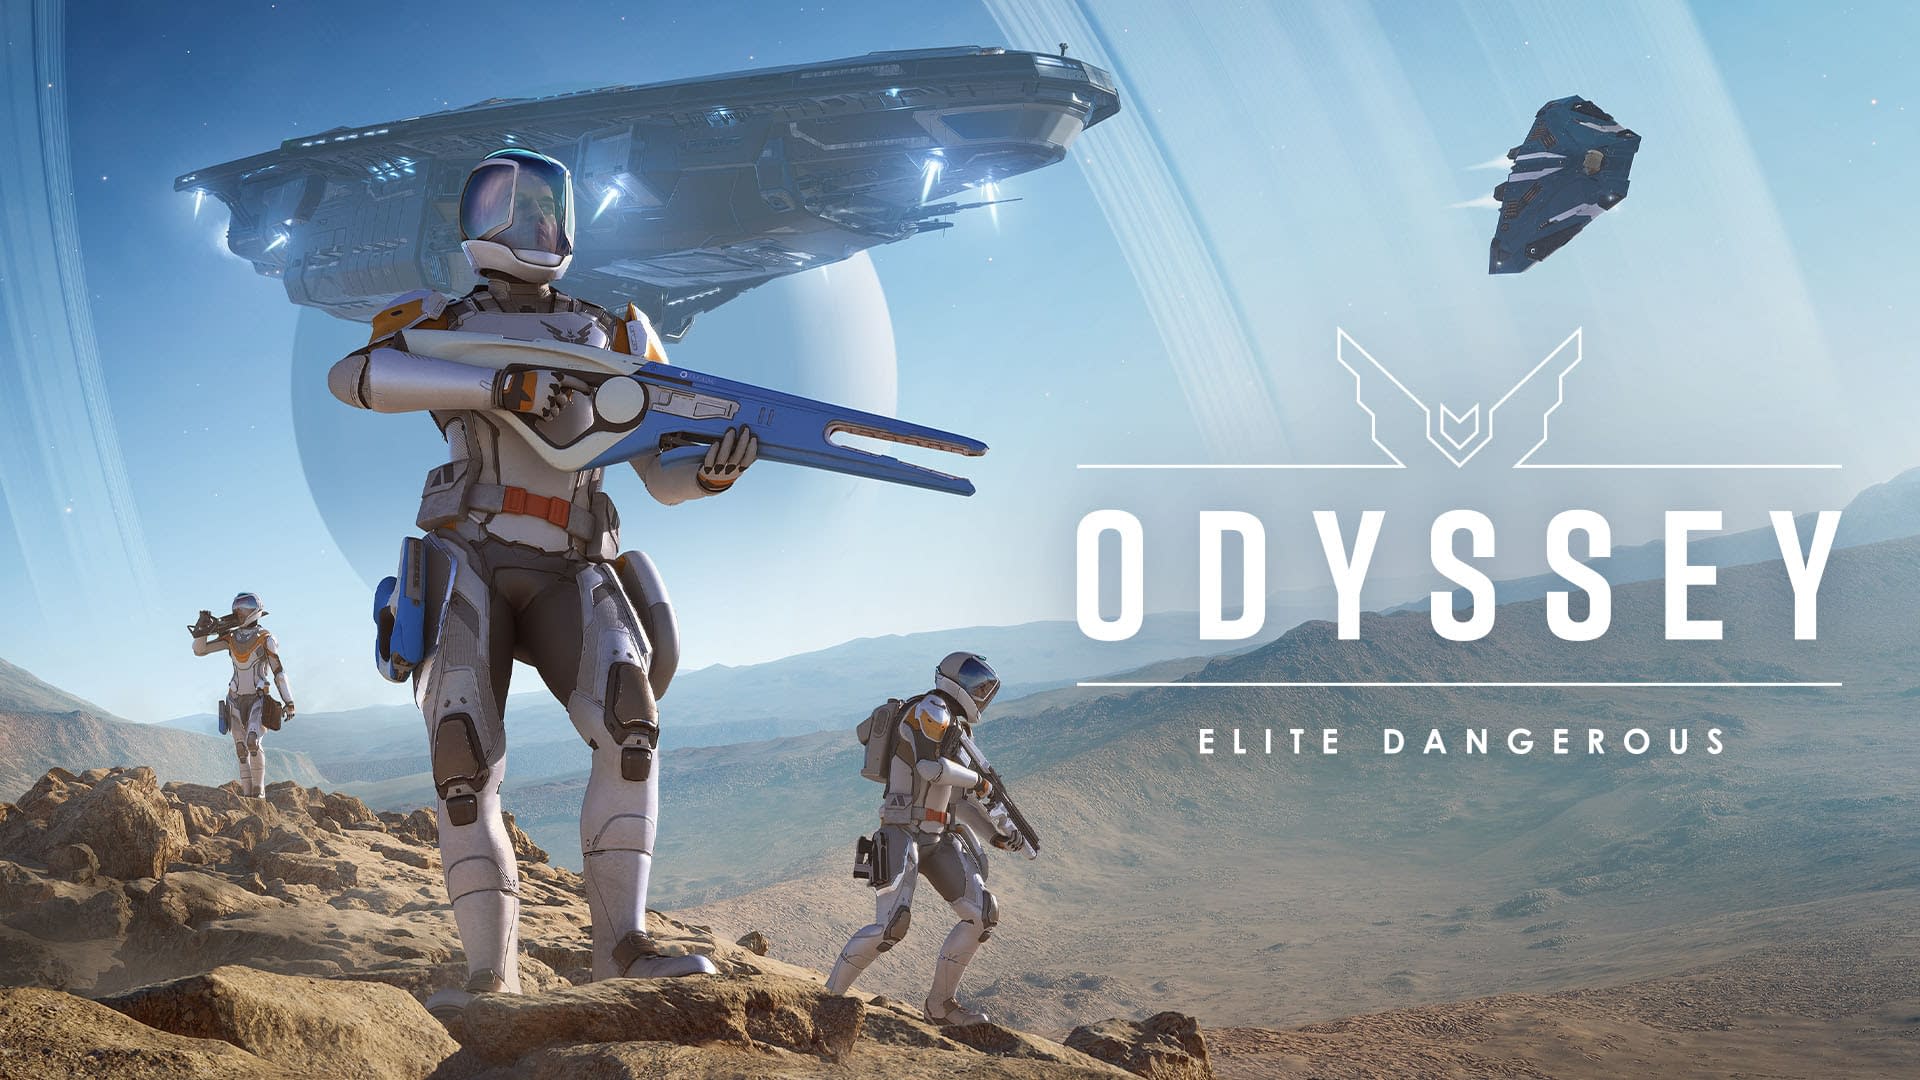 Elite Dangerous Odyssey Gameplay Trailer Revealed At The Game